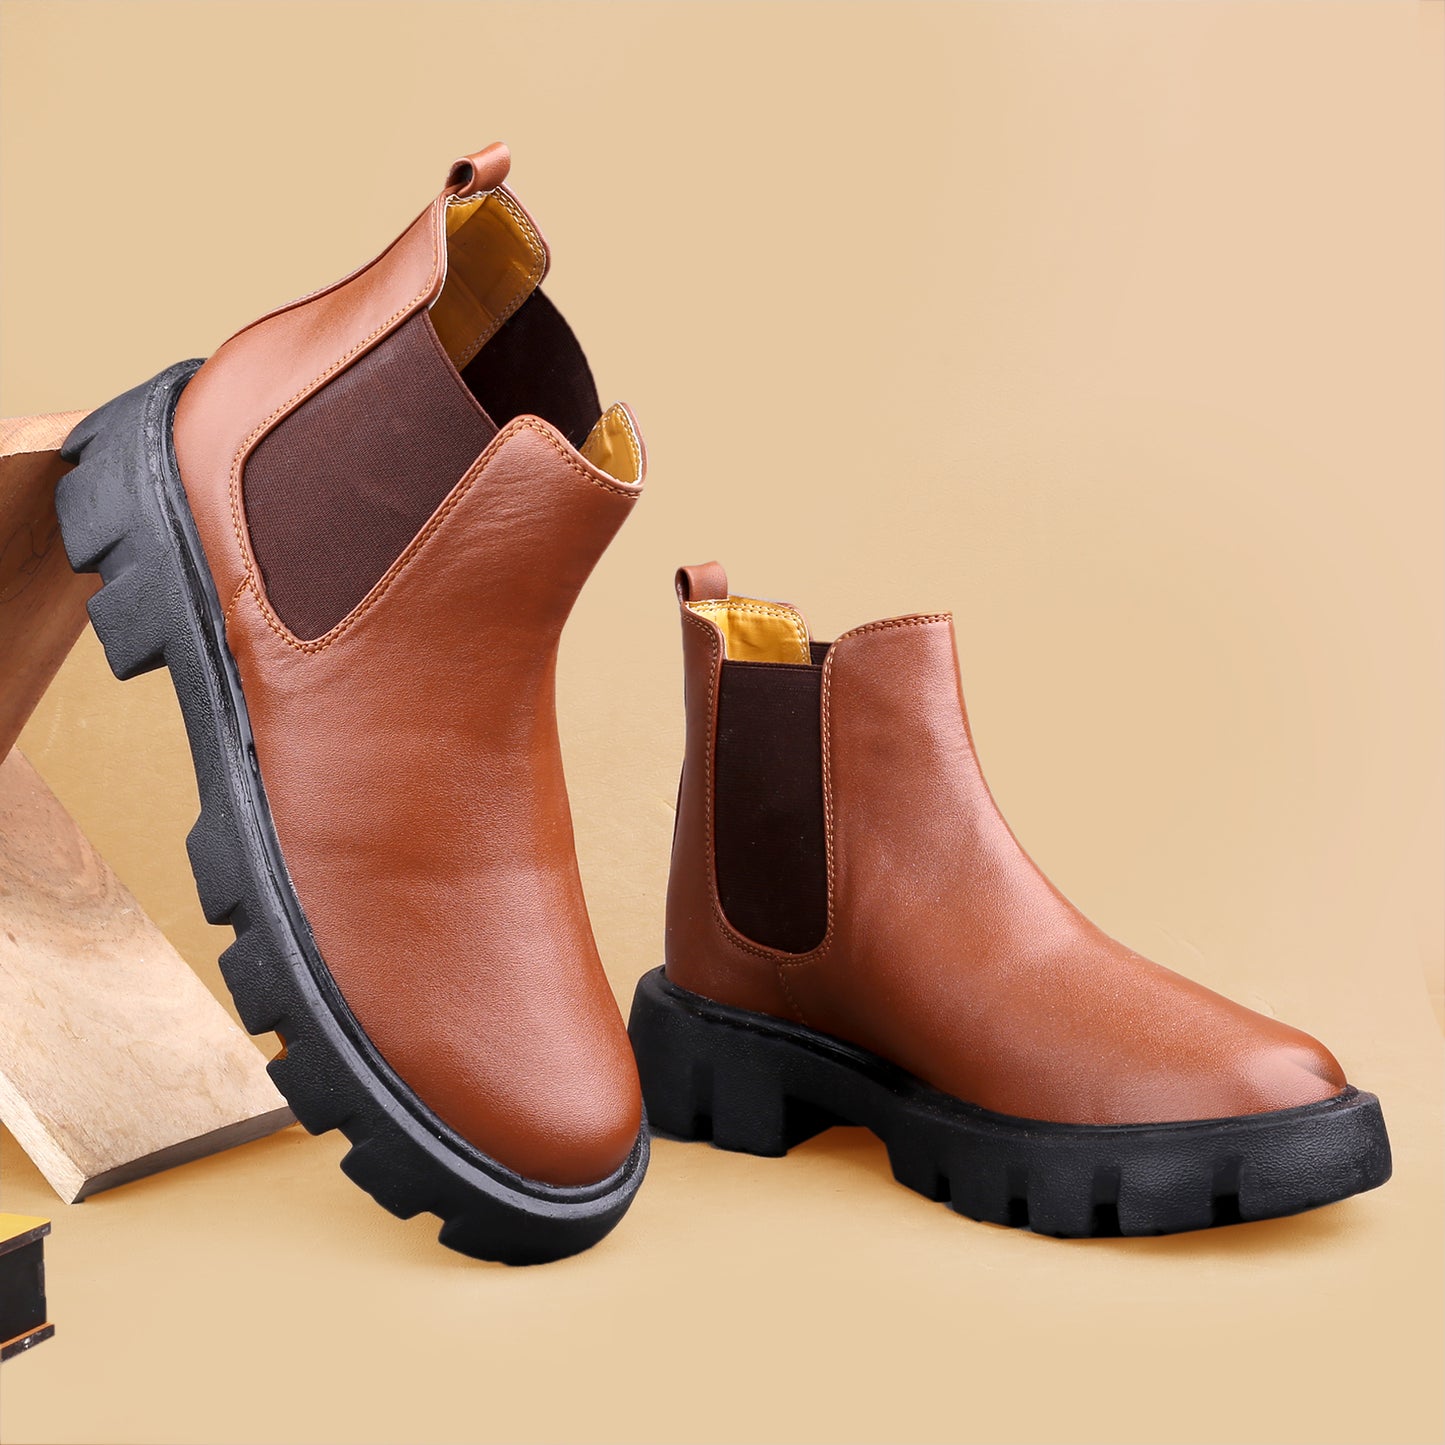 BXXY Men's Pu Material Casual Chelsea and Ankle Boots.